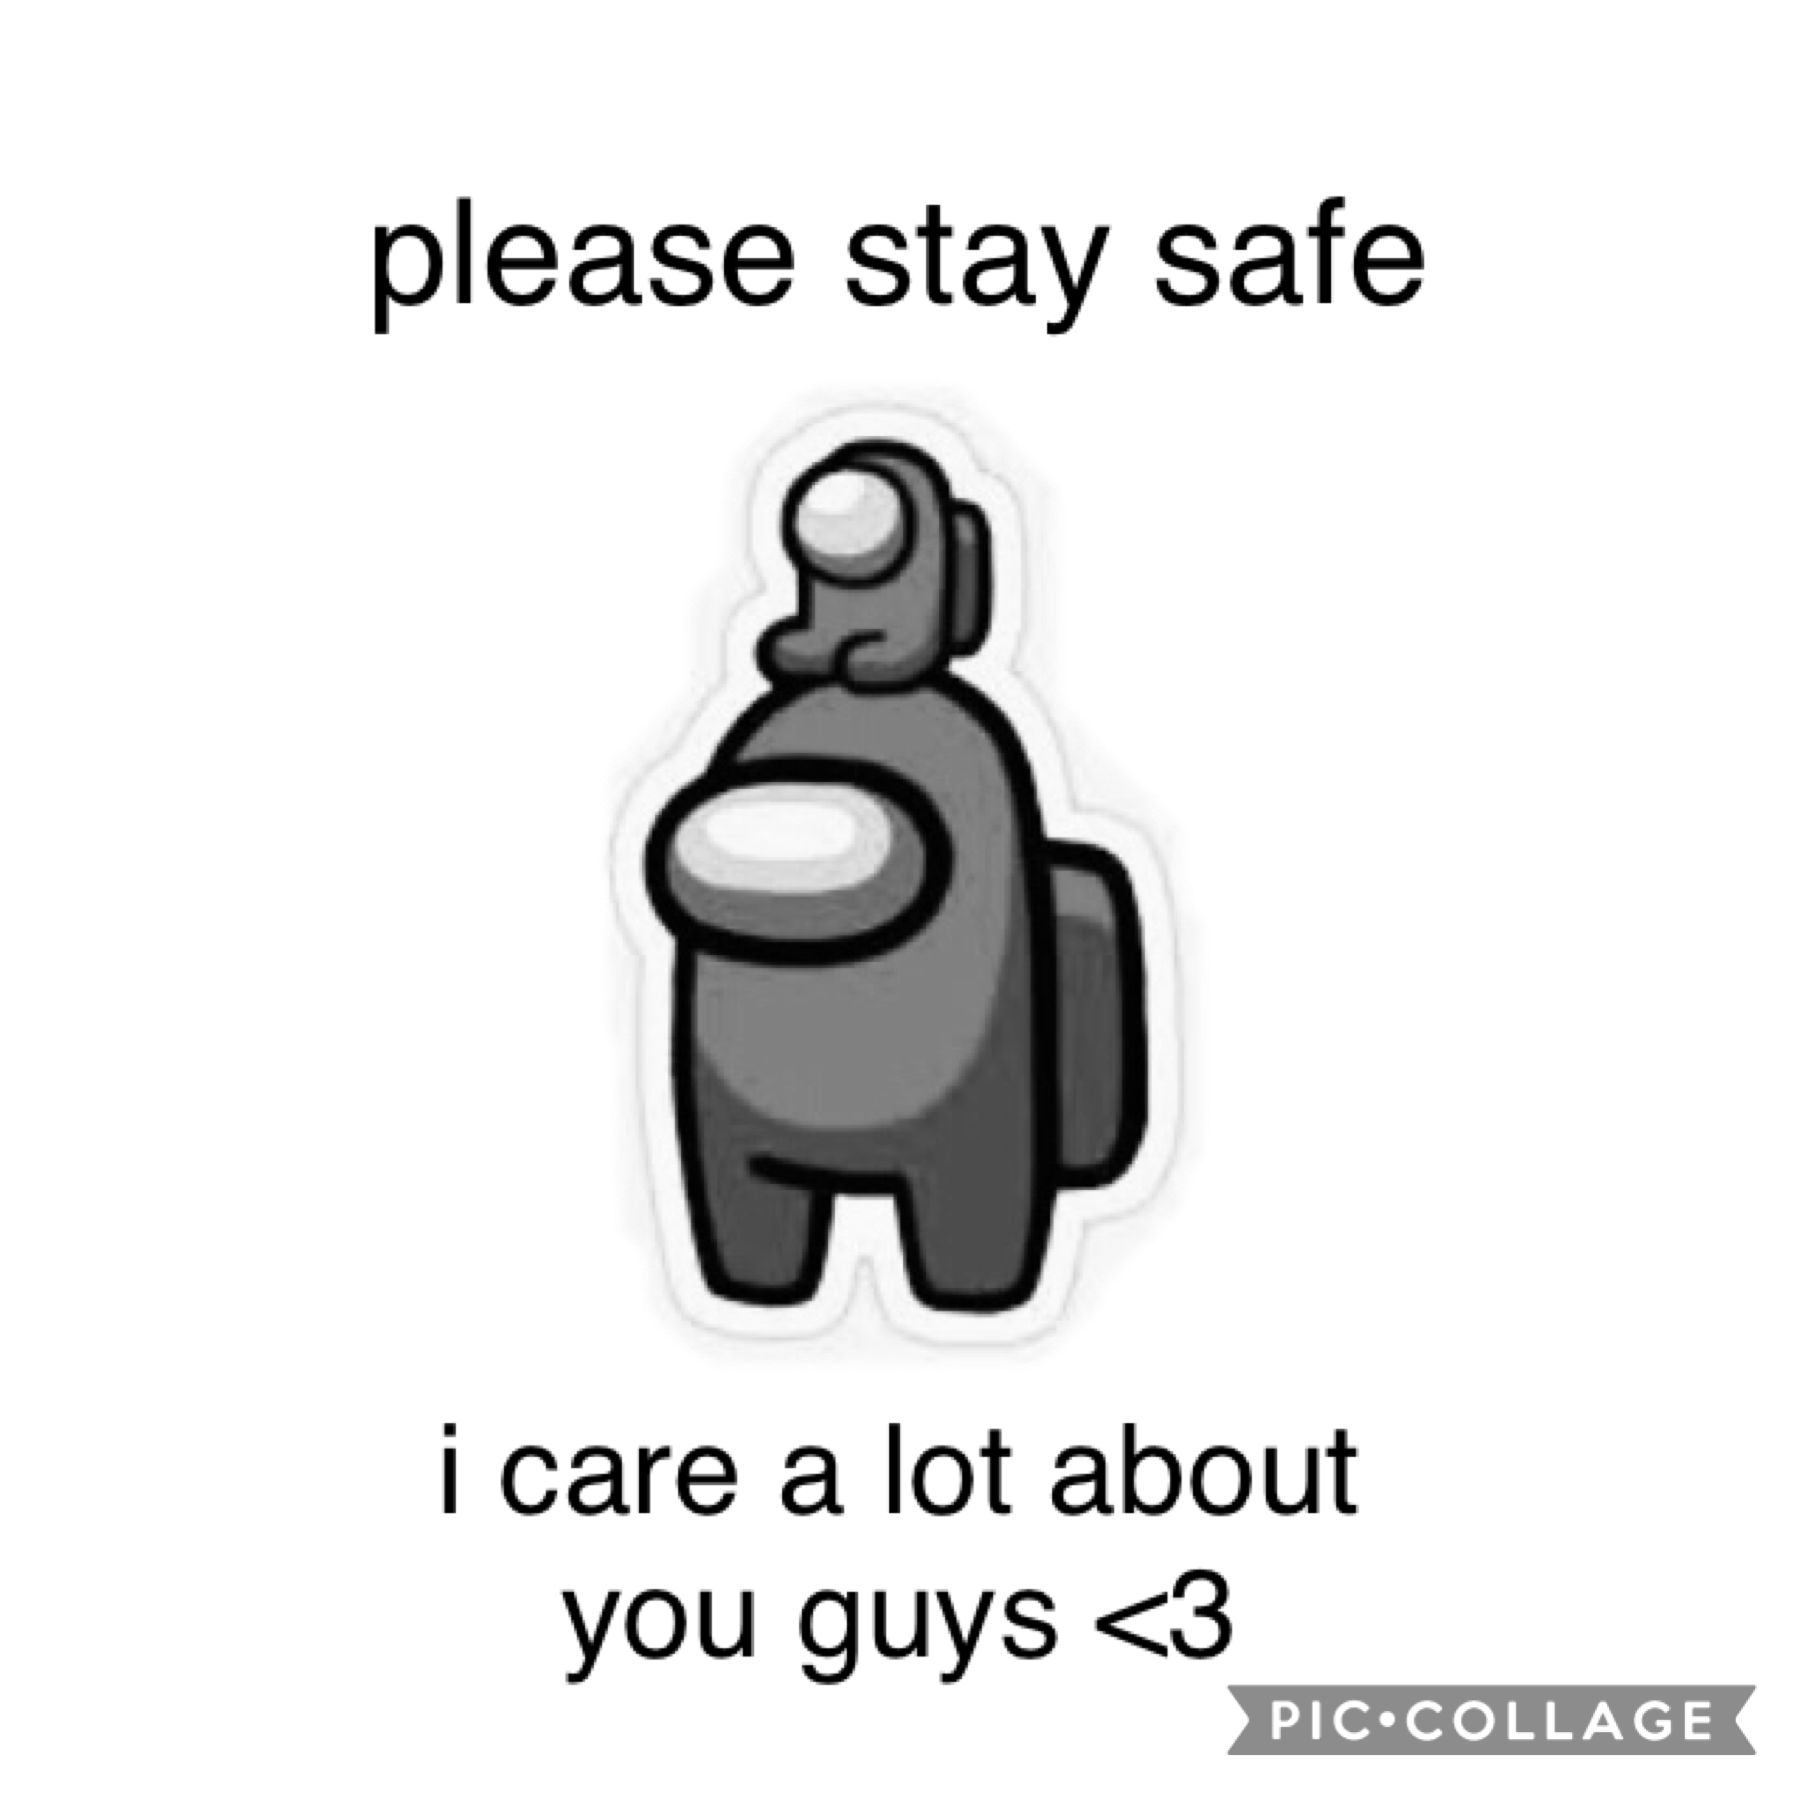 stay safe! (tap)
pc is so inactive sheesh
positions is out now! maybe a collage coming soon? idk i have no inspo. 
ily guys and i want evvvveryone to stay safe🤍